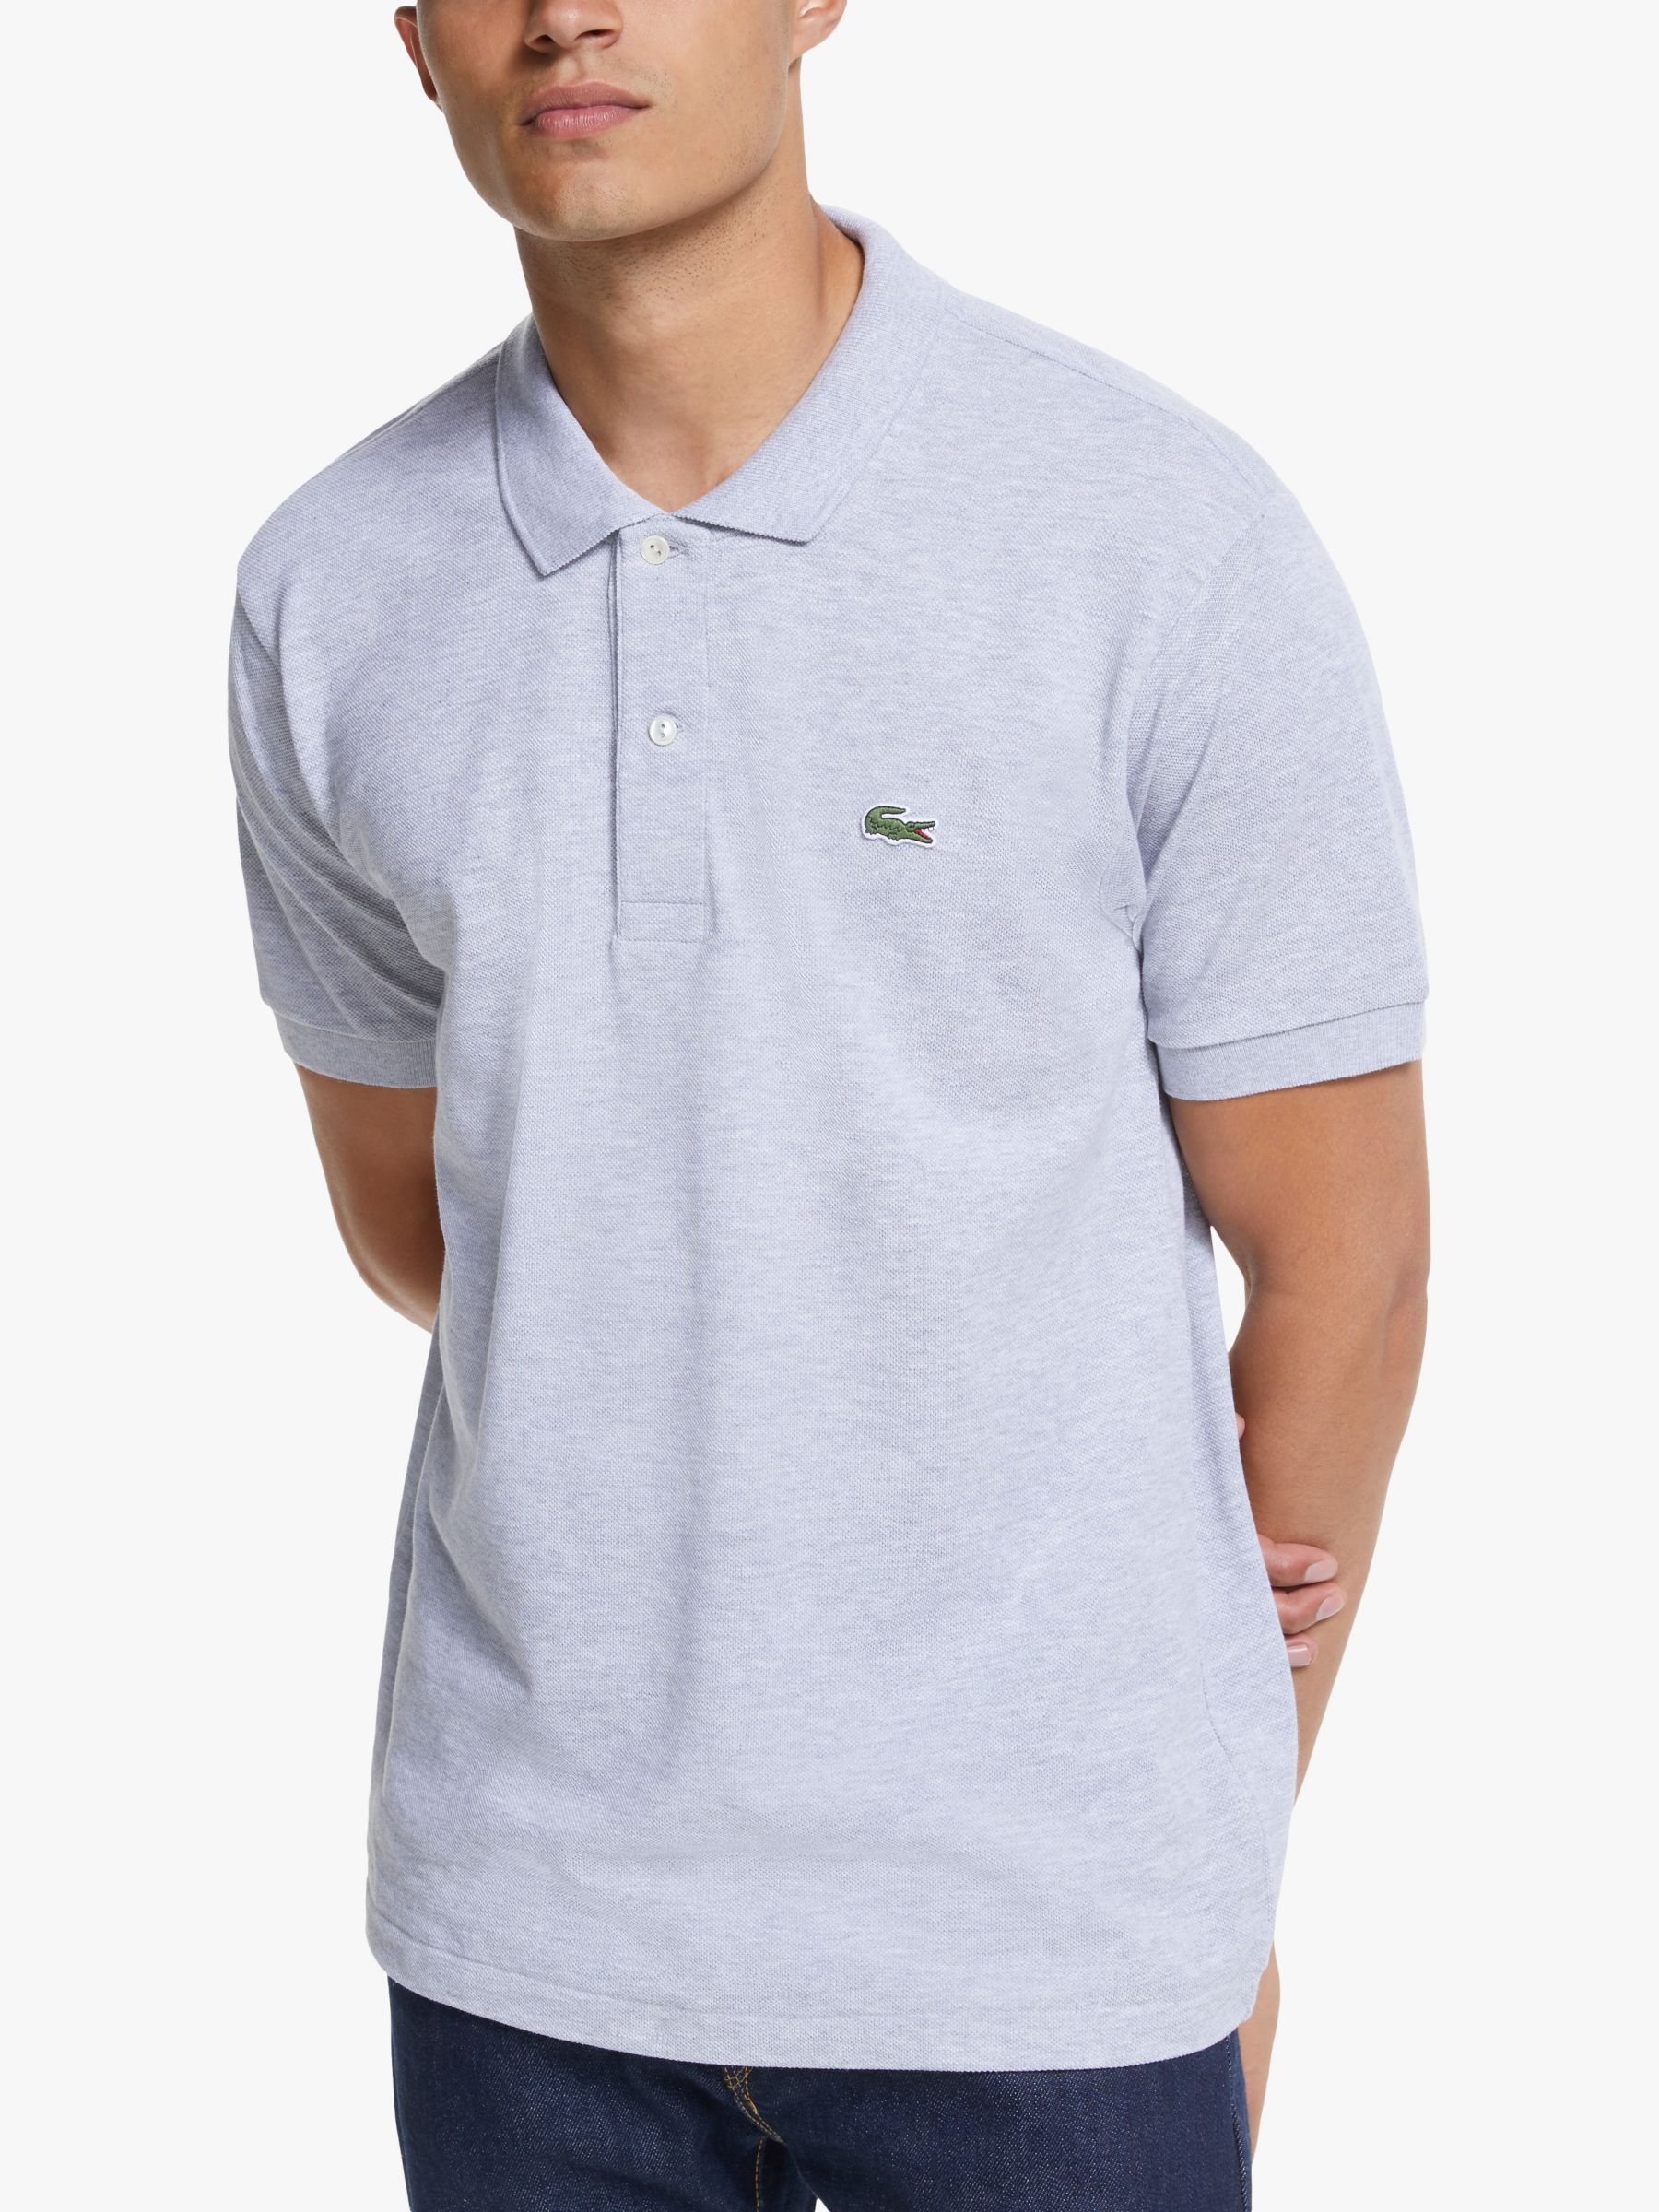 Lacoste Classic Fit Logo Polo Shirt, Silver at John & Partners